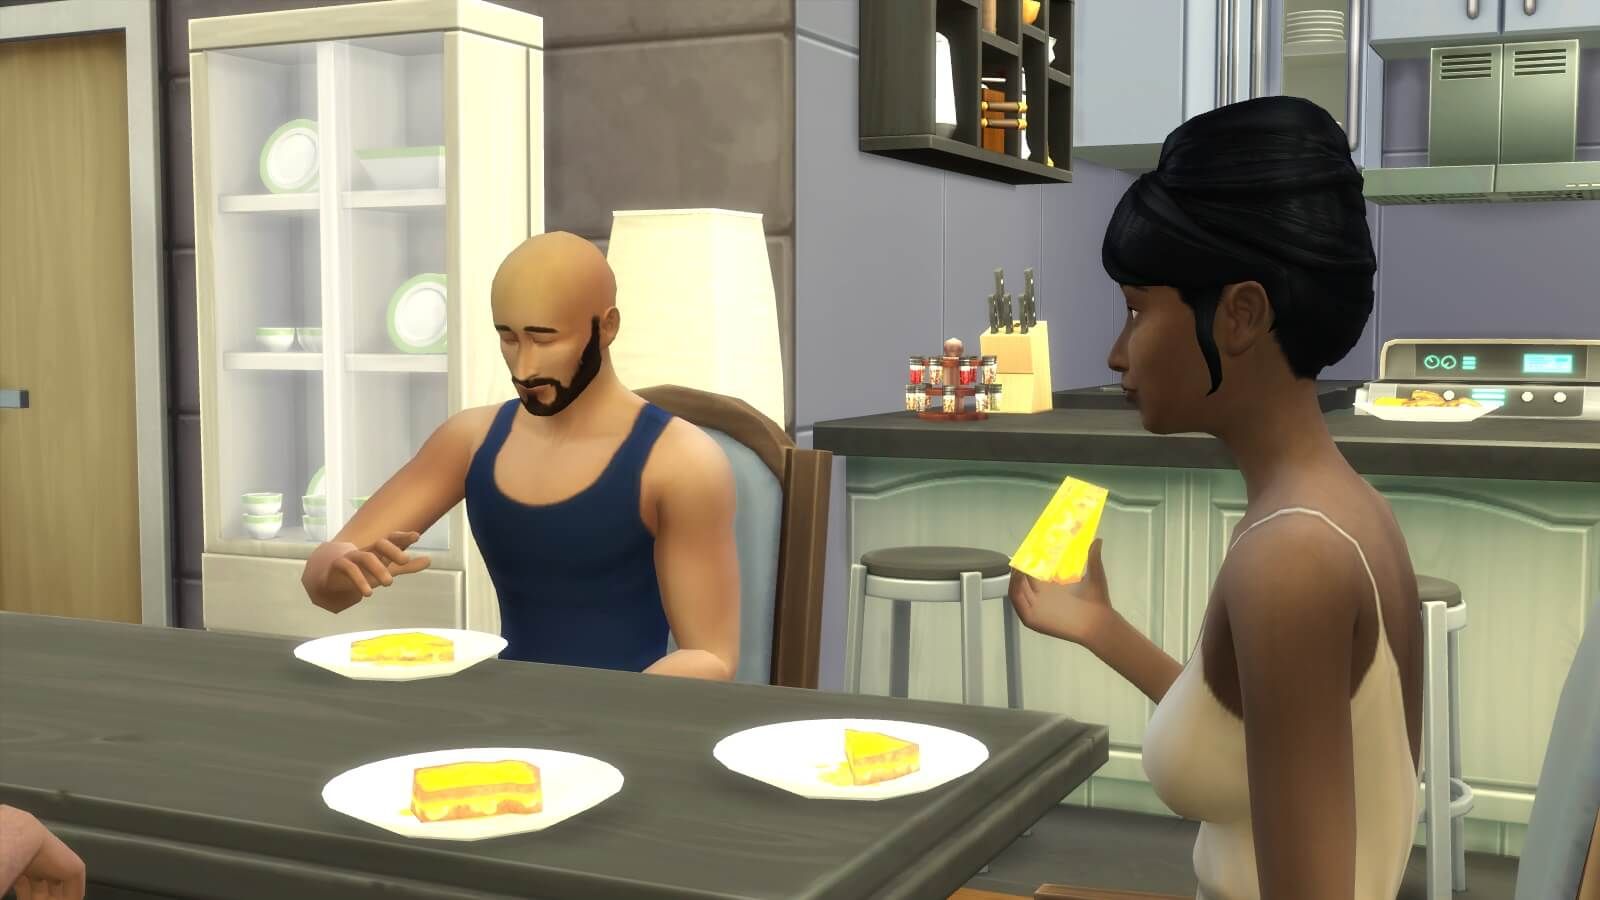 Sims Eating Grilled Cheese in The Sims 4